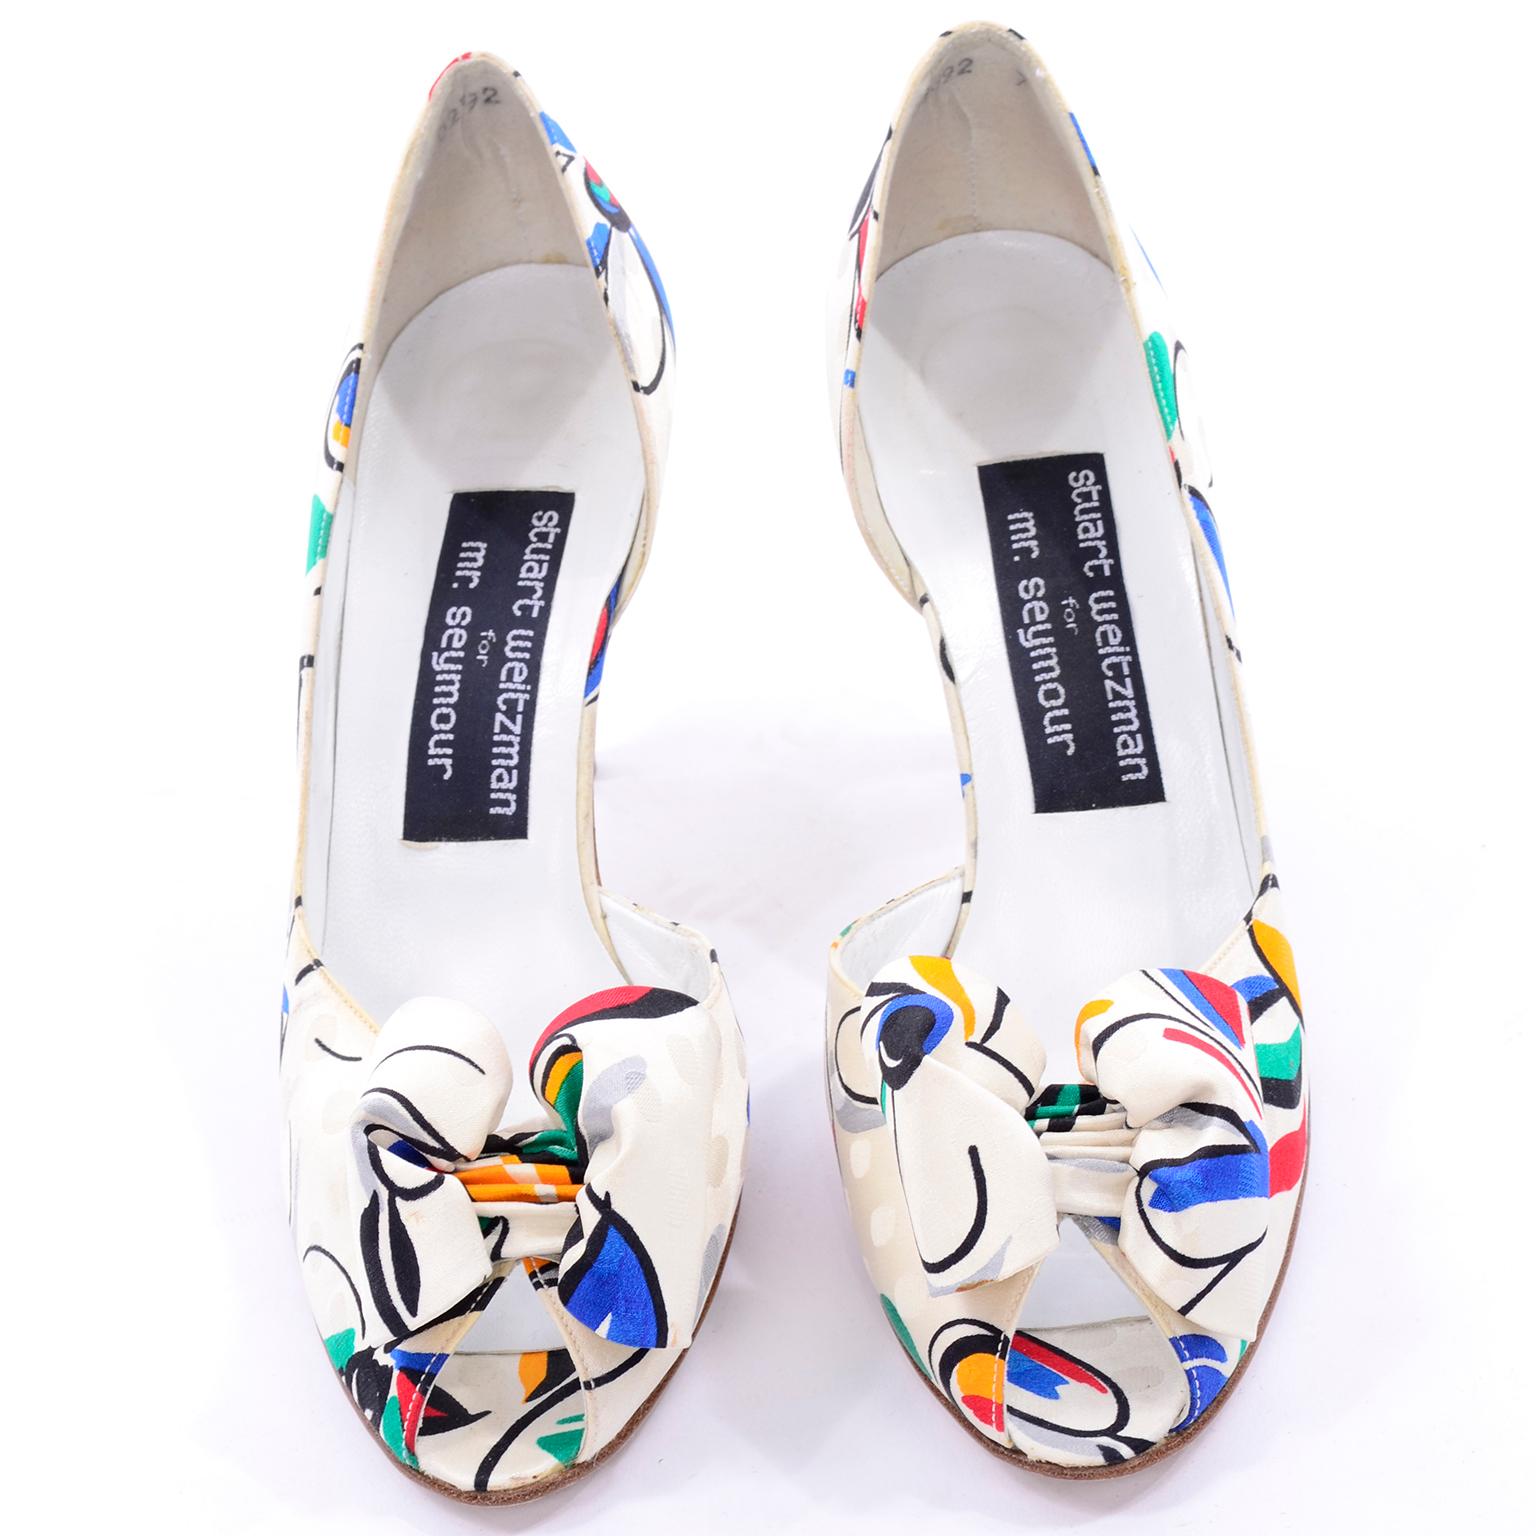 These are the cutest peep-toe Vintage shoes from Stuart Weitzman for Mr. Seymour! These fabulous 1980's shoes are so unique with their bold red, green, blue and yellow floral print fabric. The base of the fabric is white with a tone on tone design.